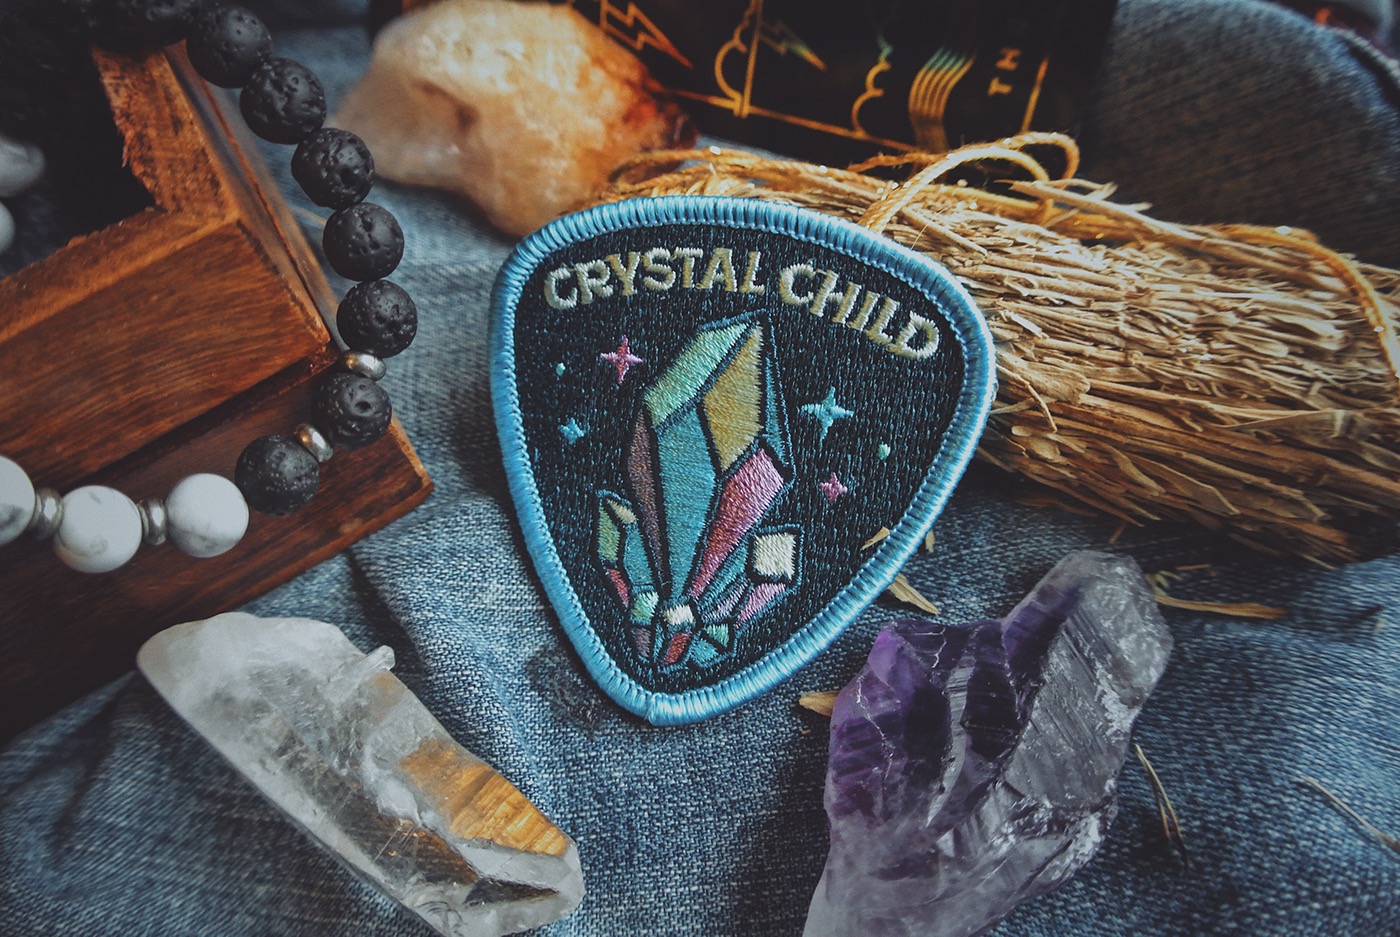 patch pin Enamel Pin lapel pin metaphysical New Age Clothing Line t-shirt apparel crystals